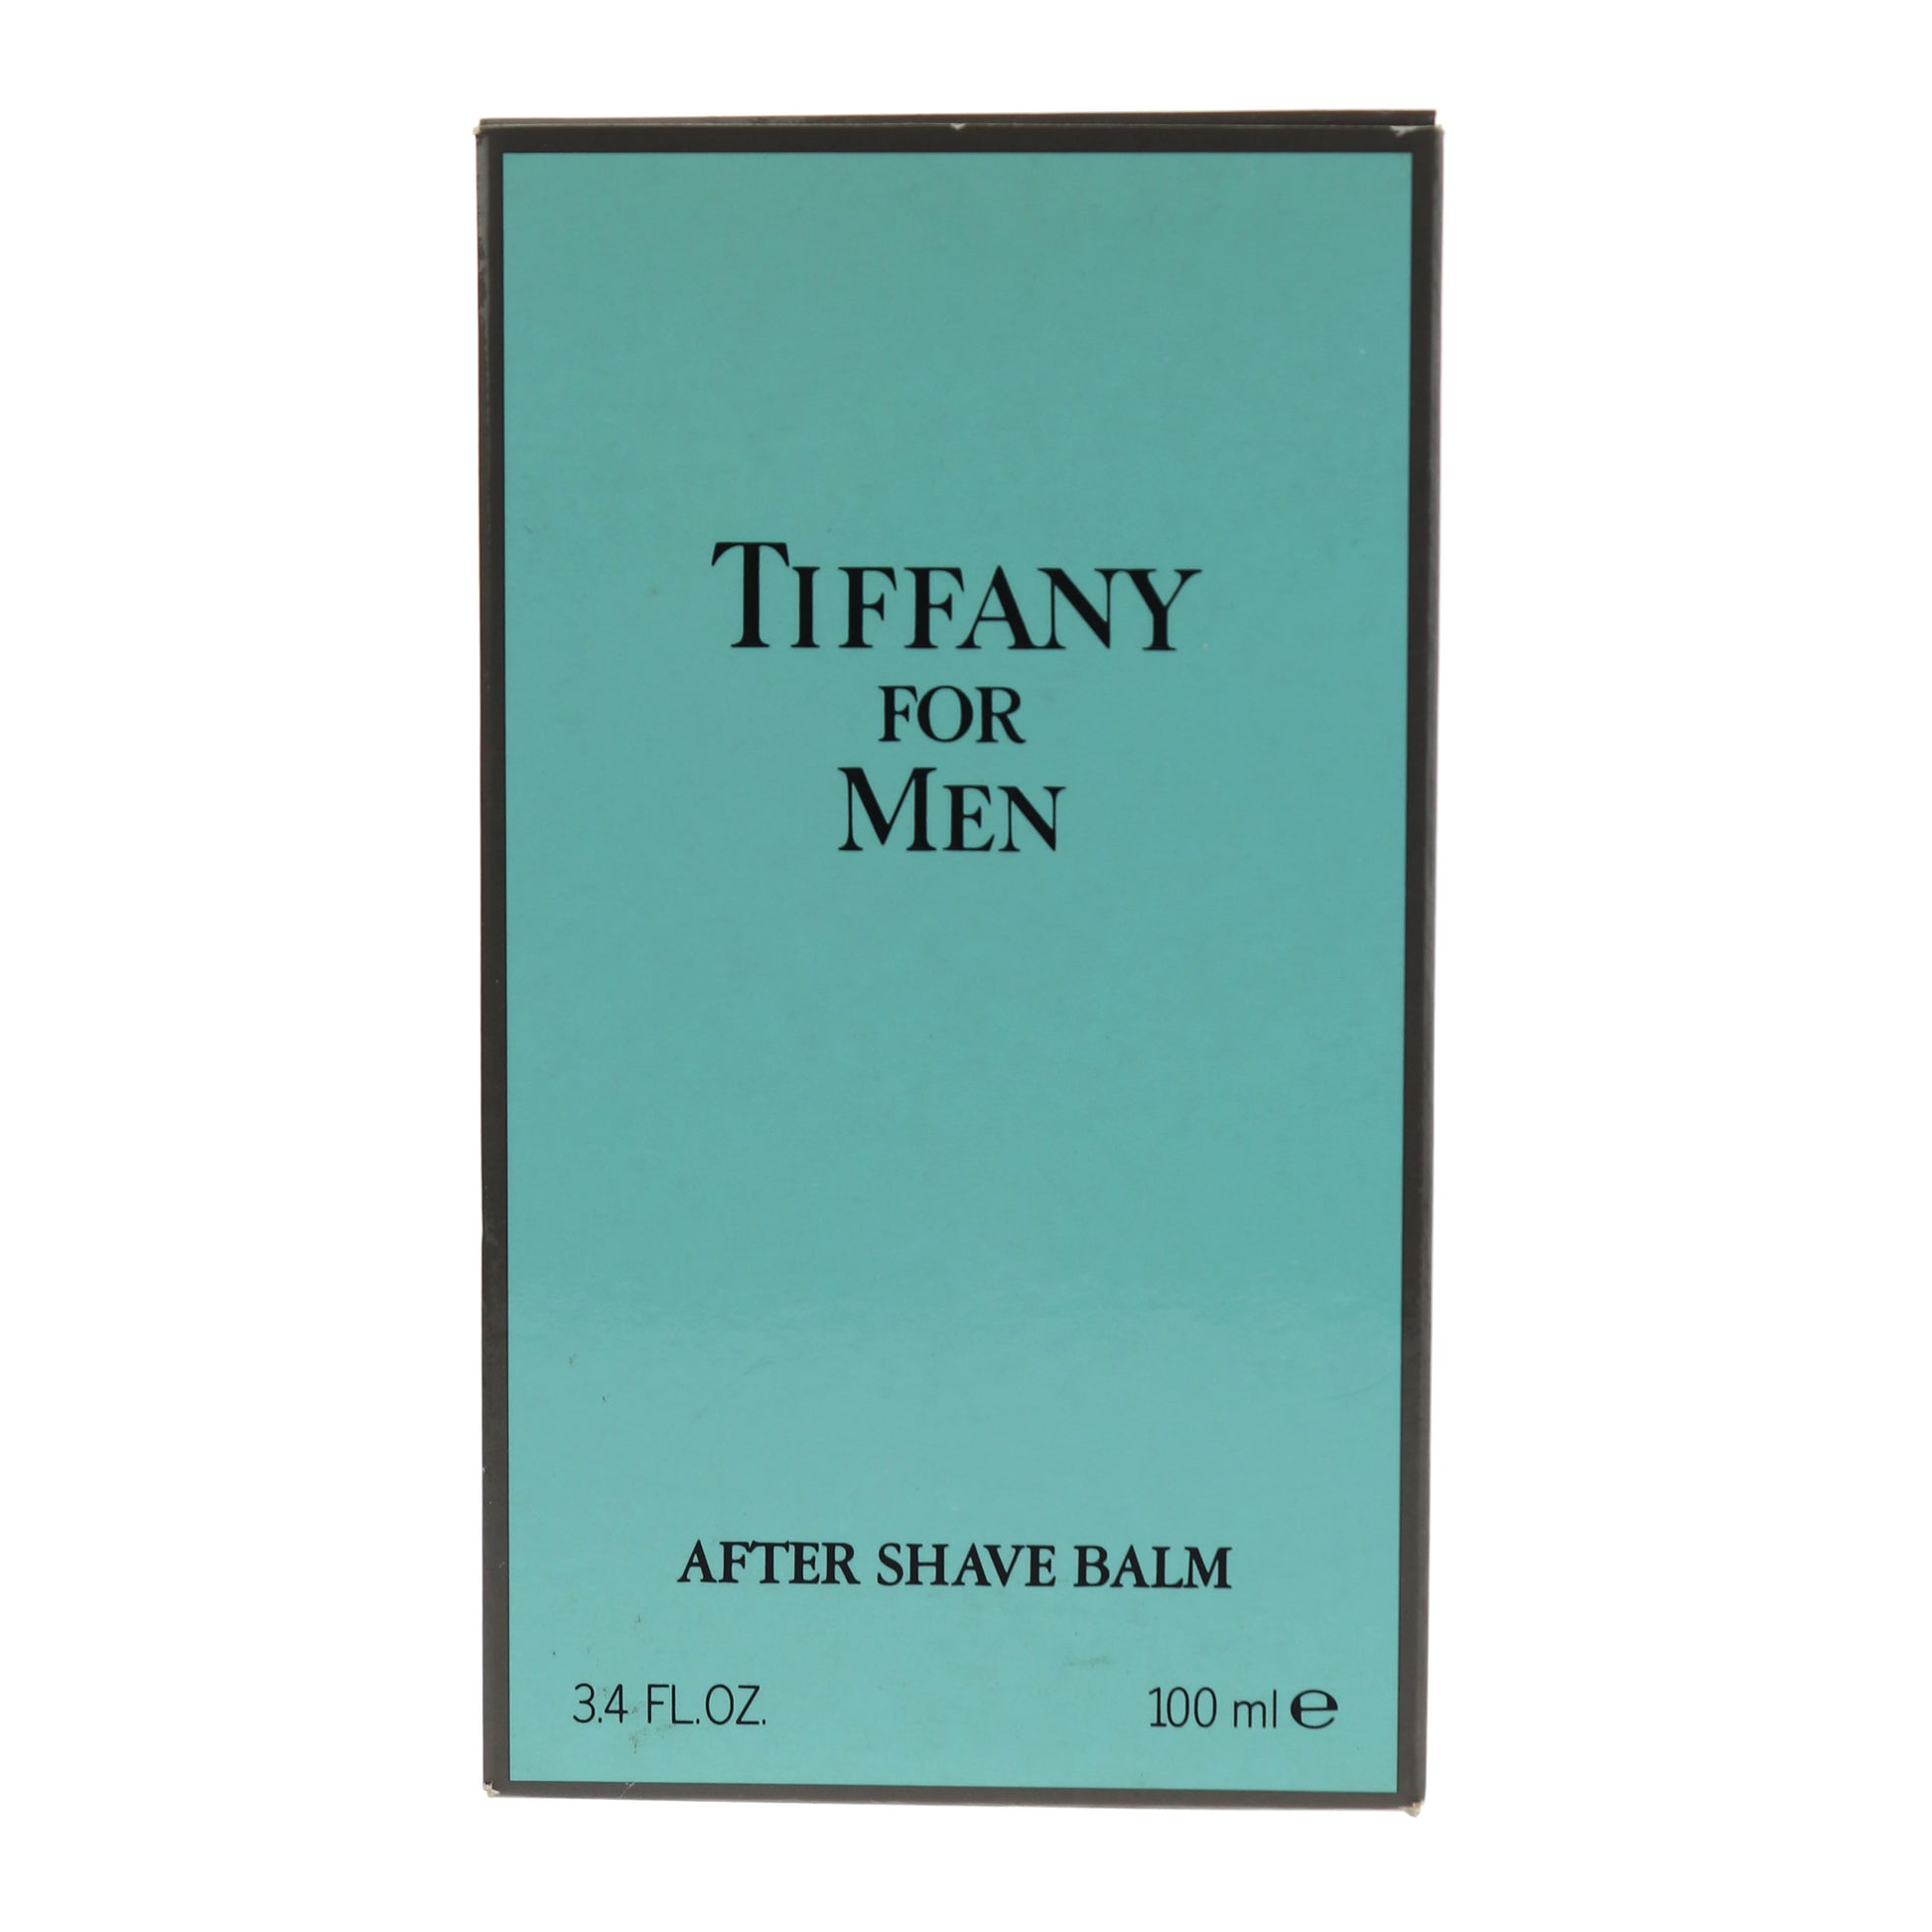 Triffany For Men After Shave Balm 100 ml